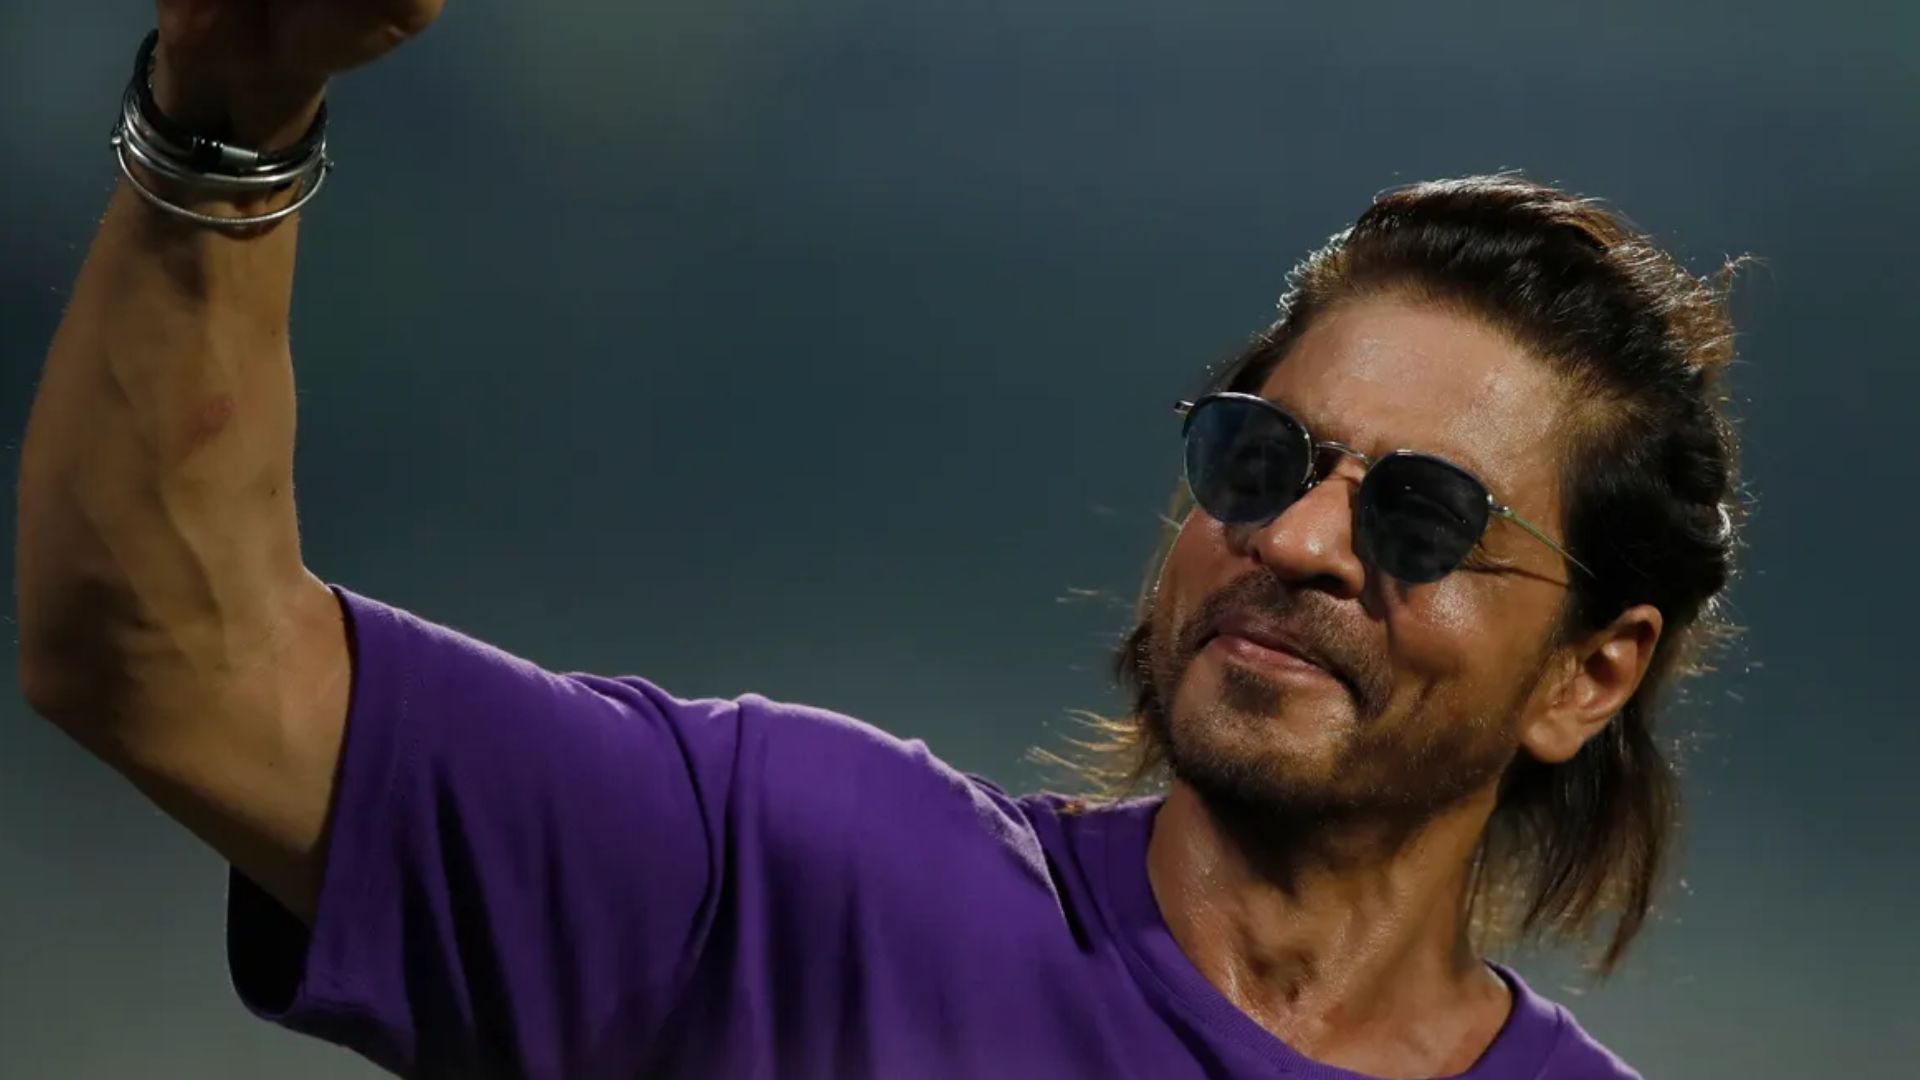 Shahrukh Khan was all smiles after KKR